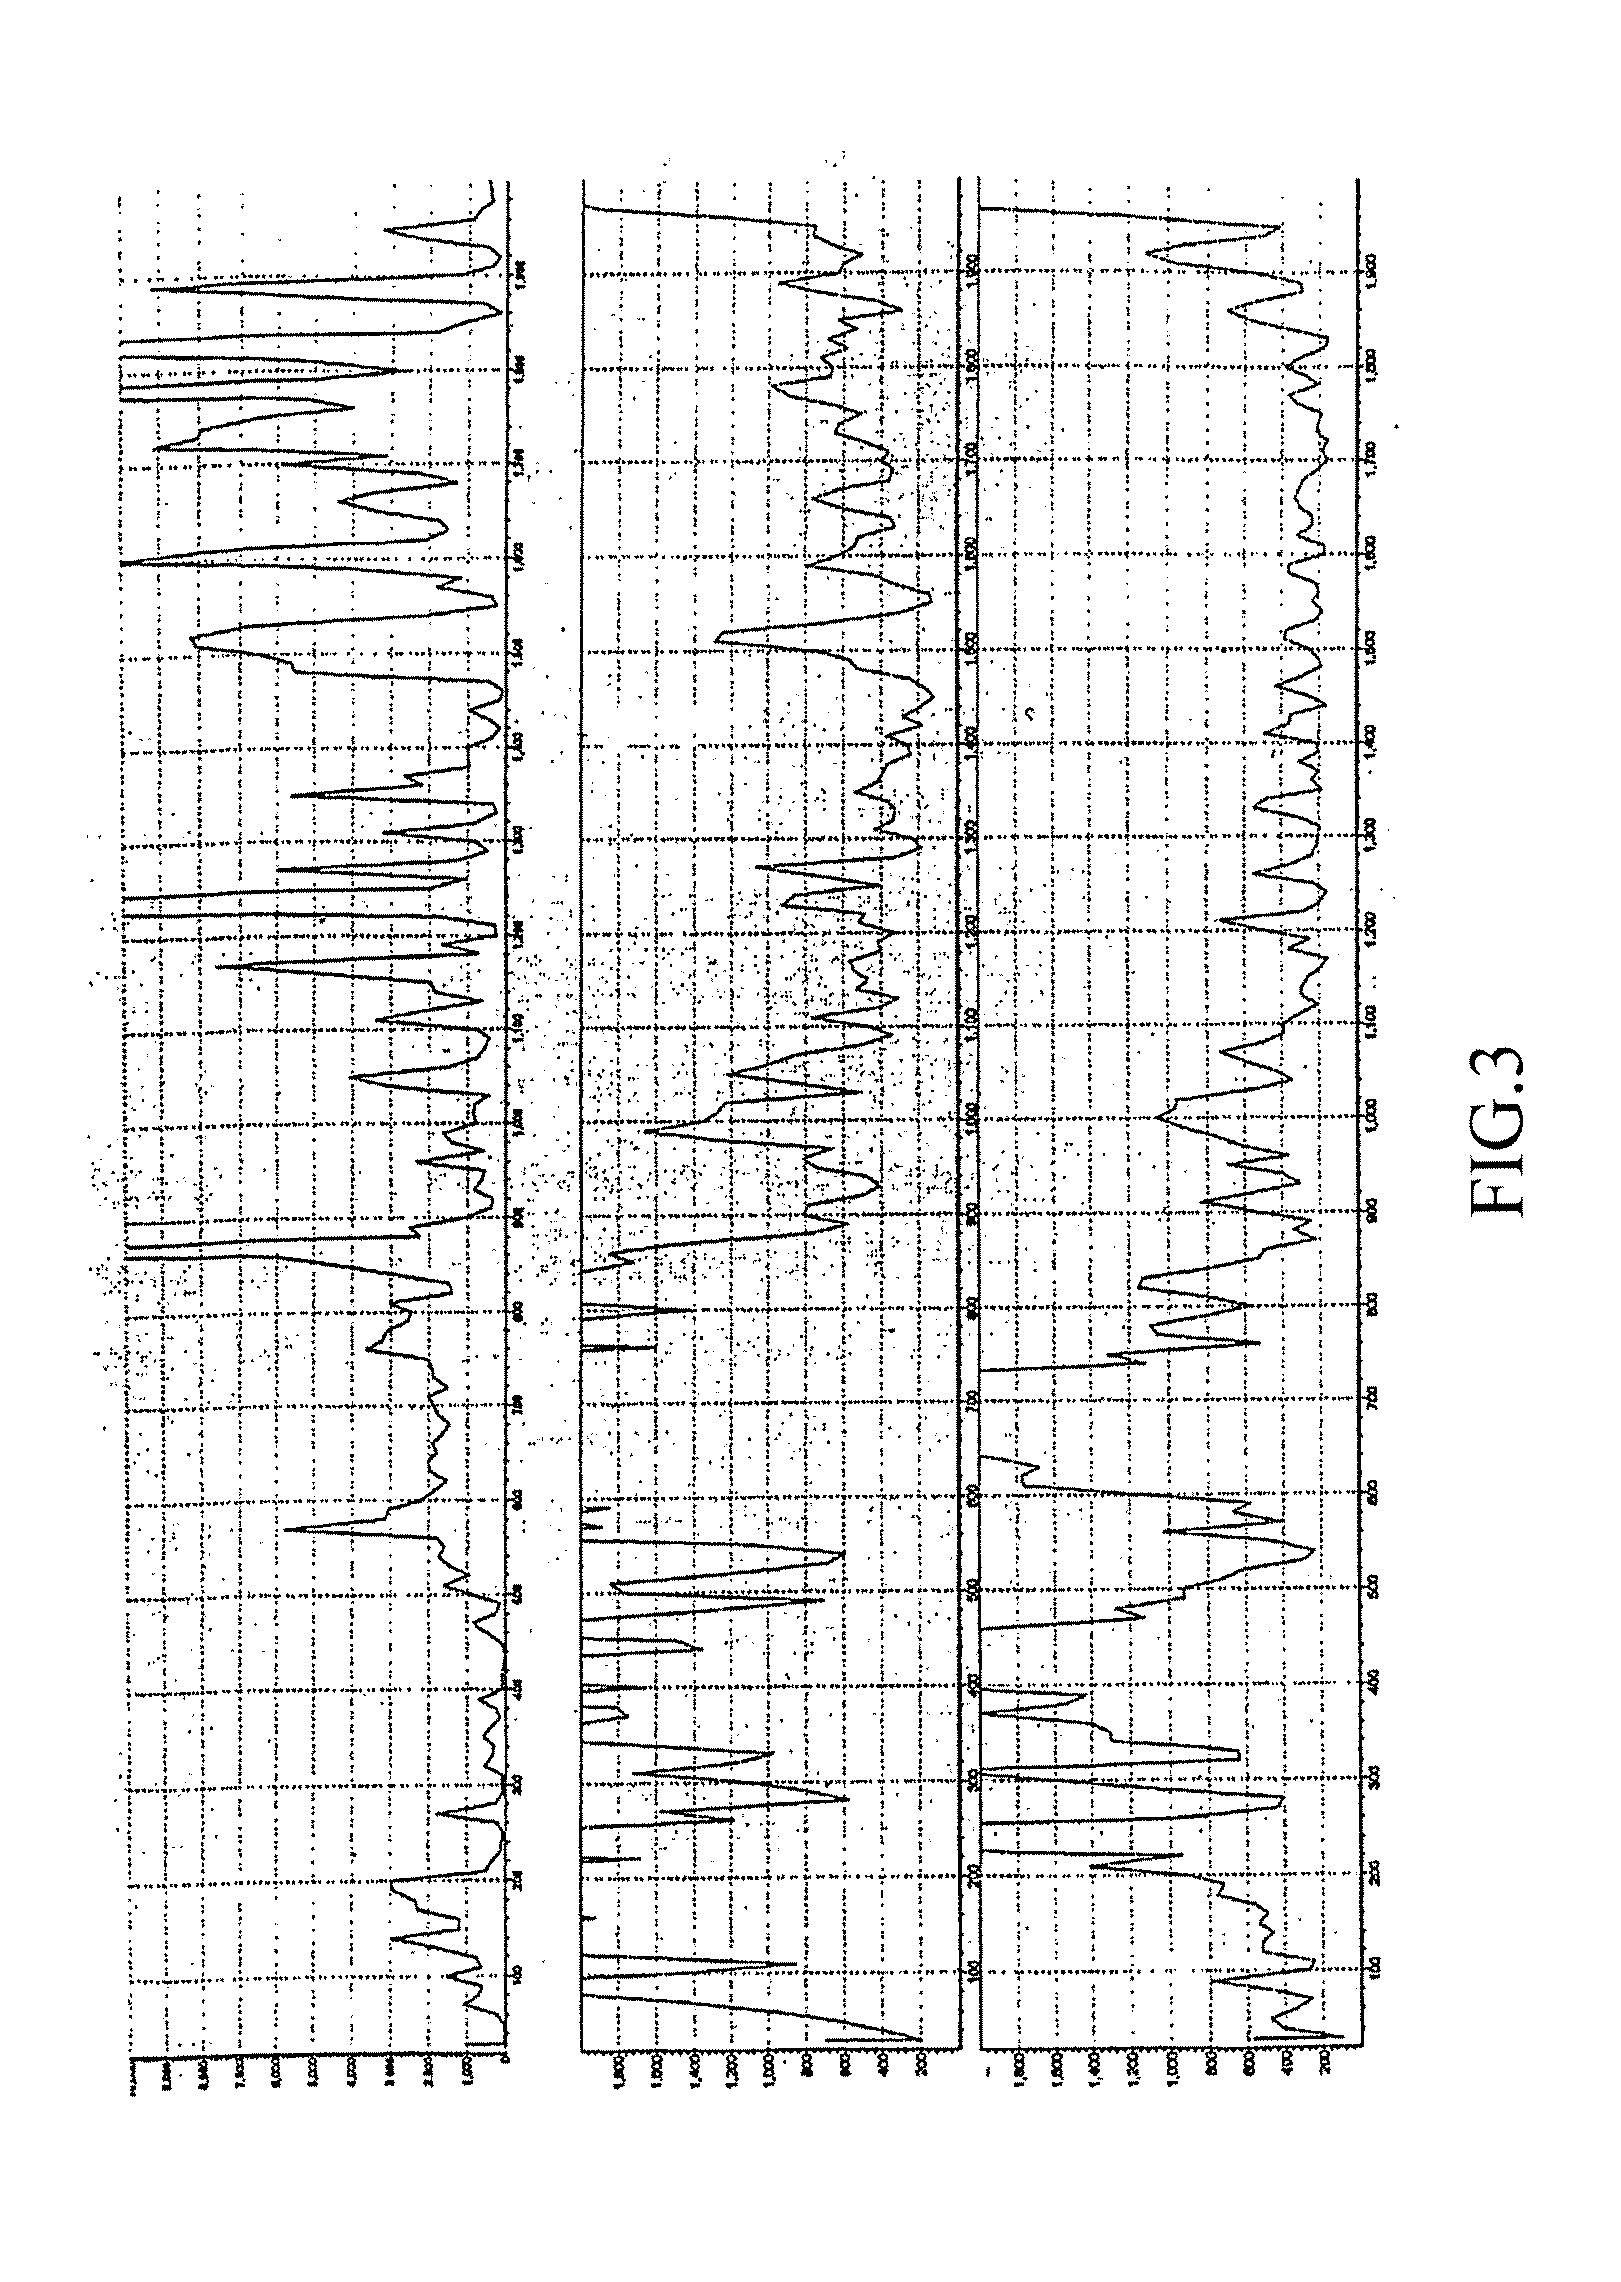 Method and Apparatus for Measuring the Resistivity of Electromagnetic Waves of the Earth